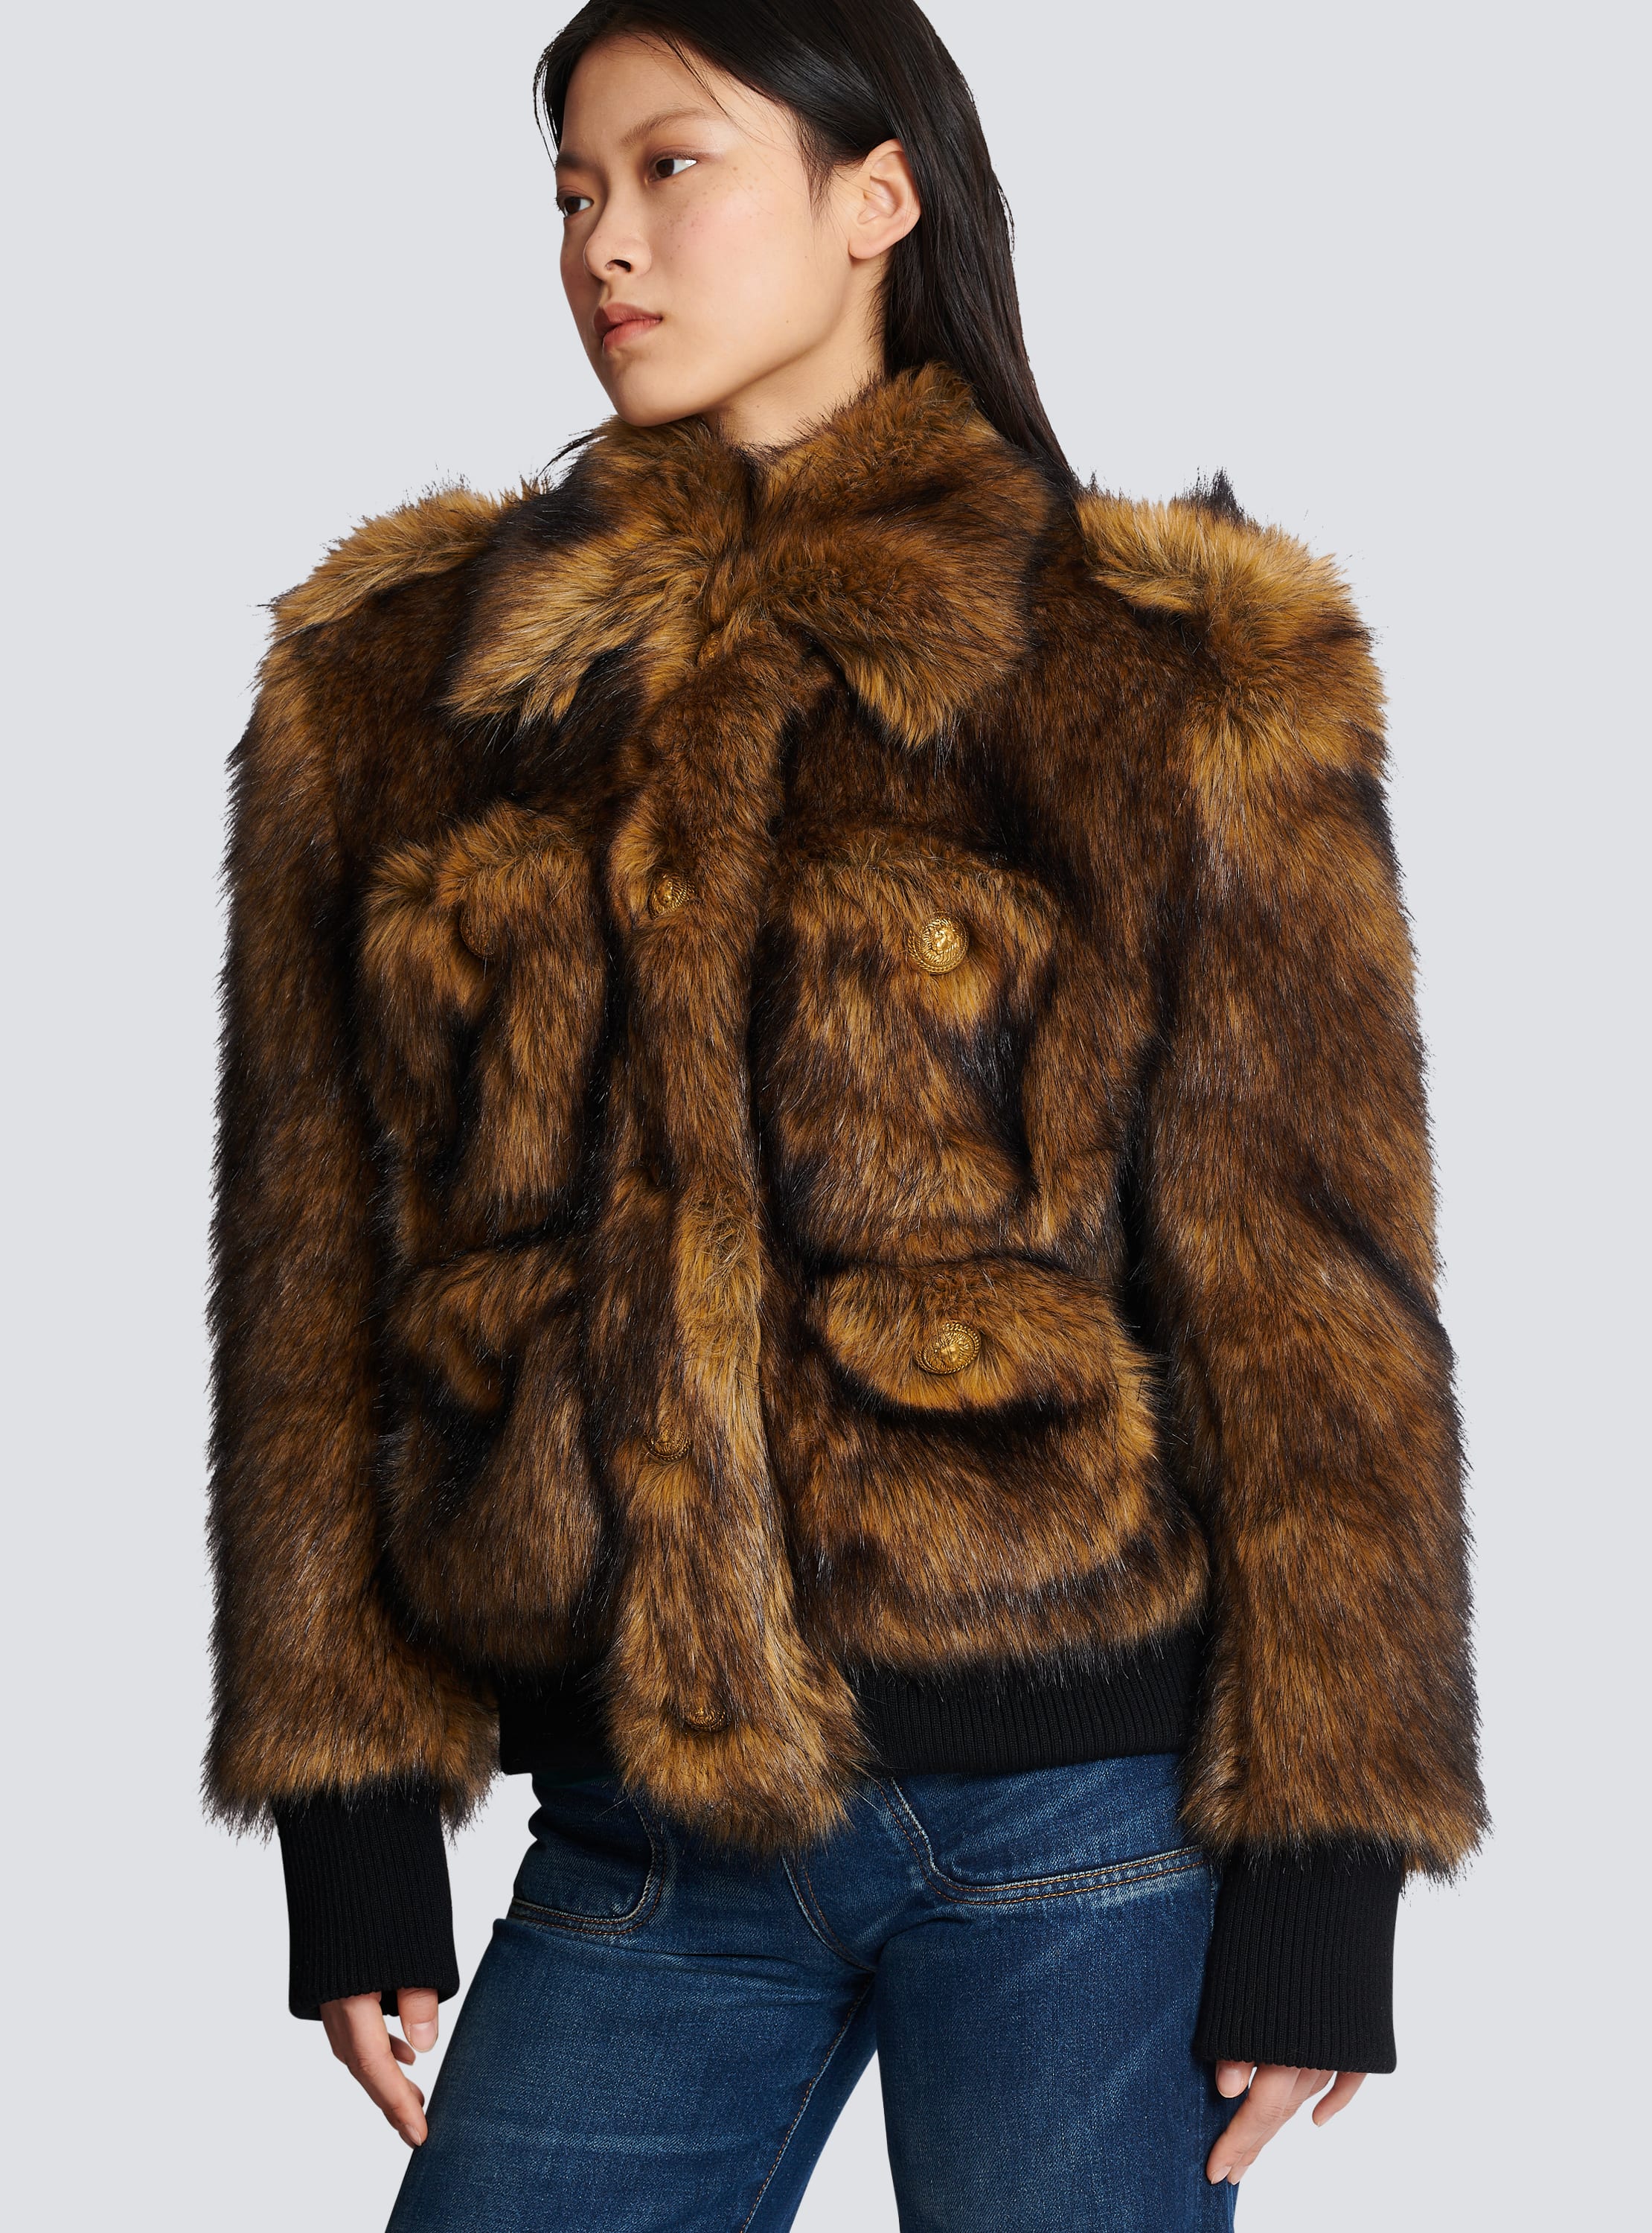 Balmain - Patent Leather and Faux Fur Jacket